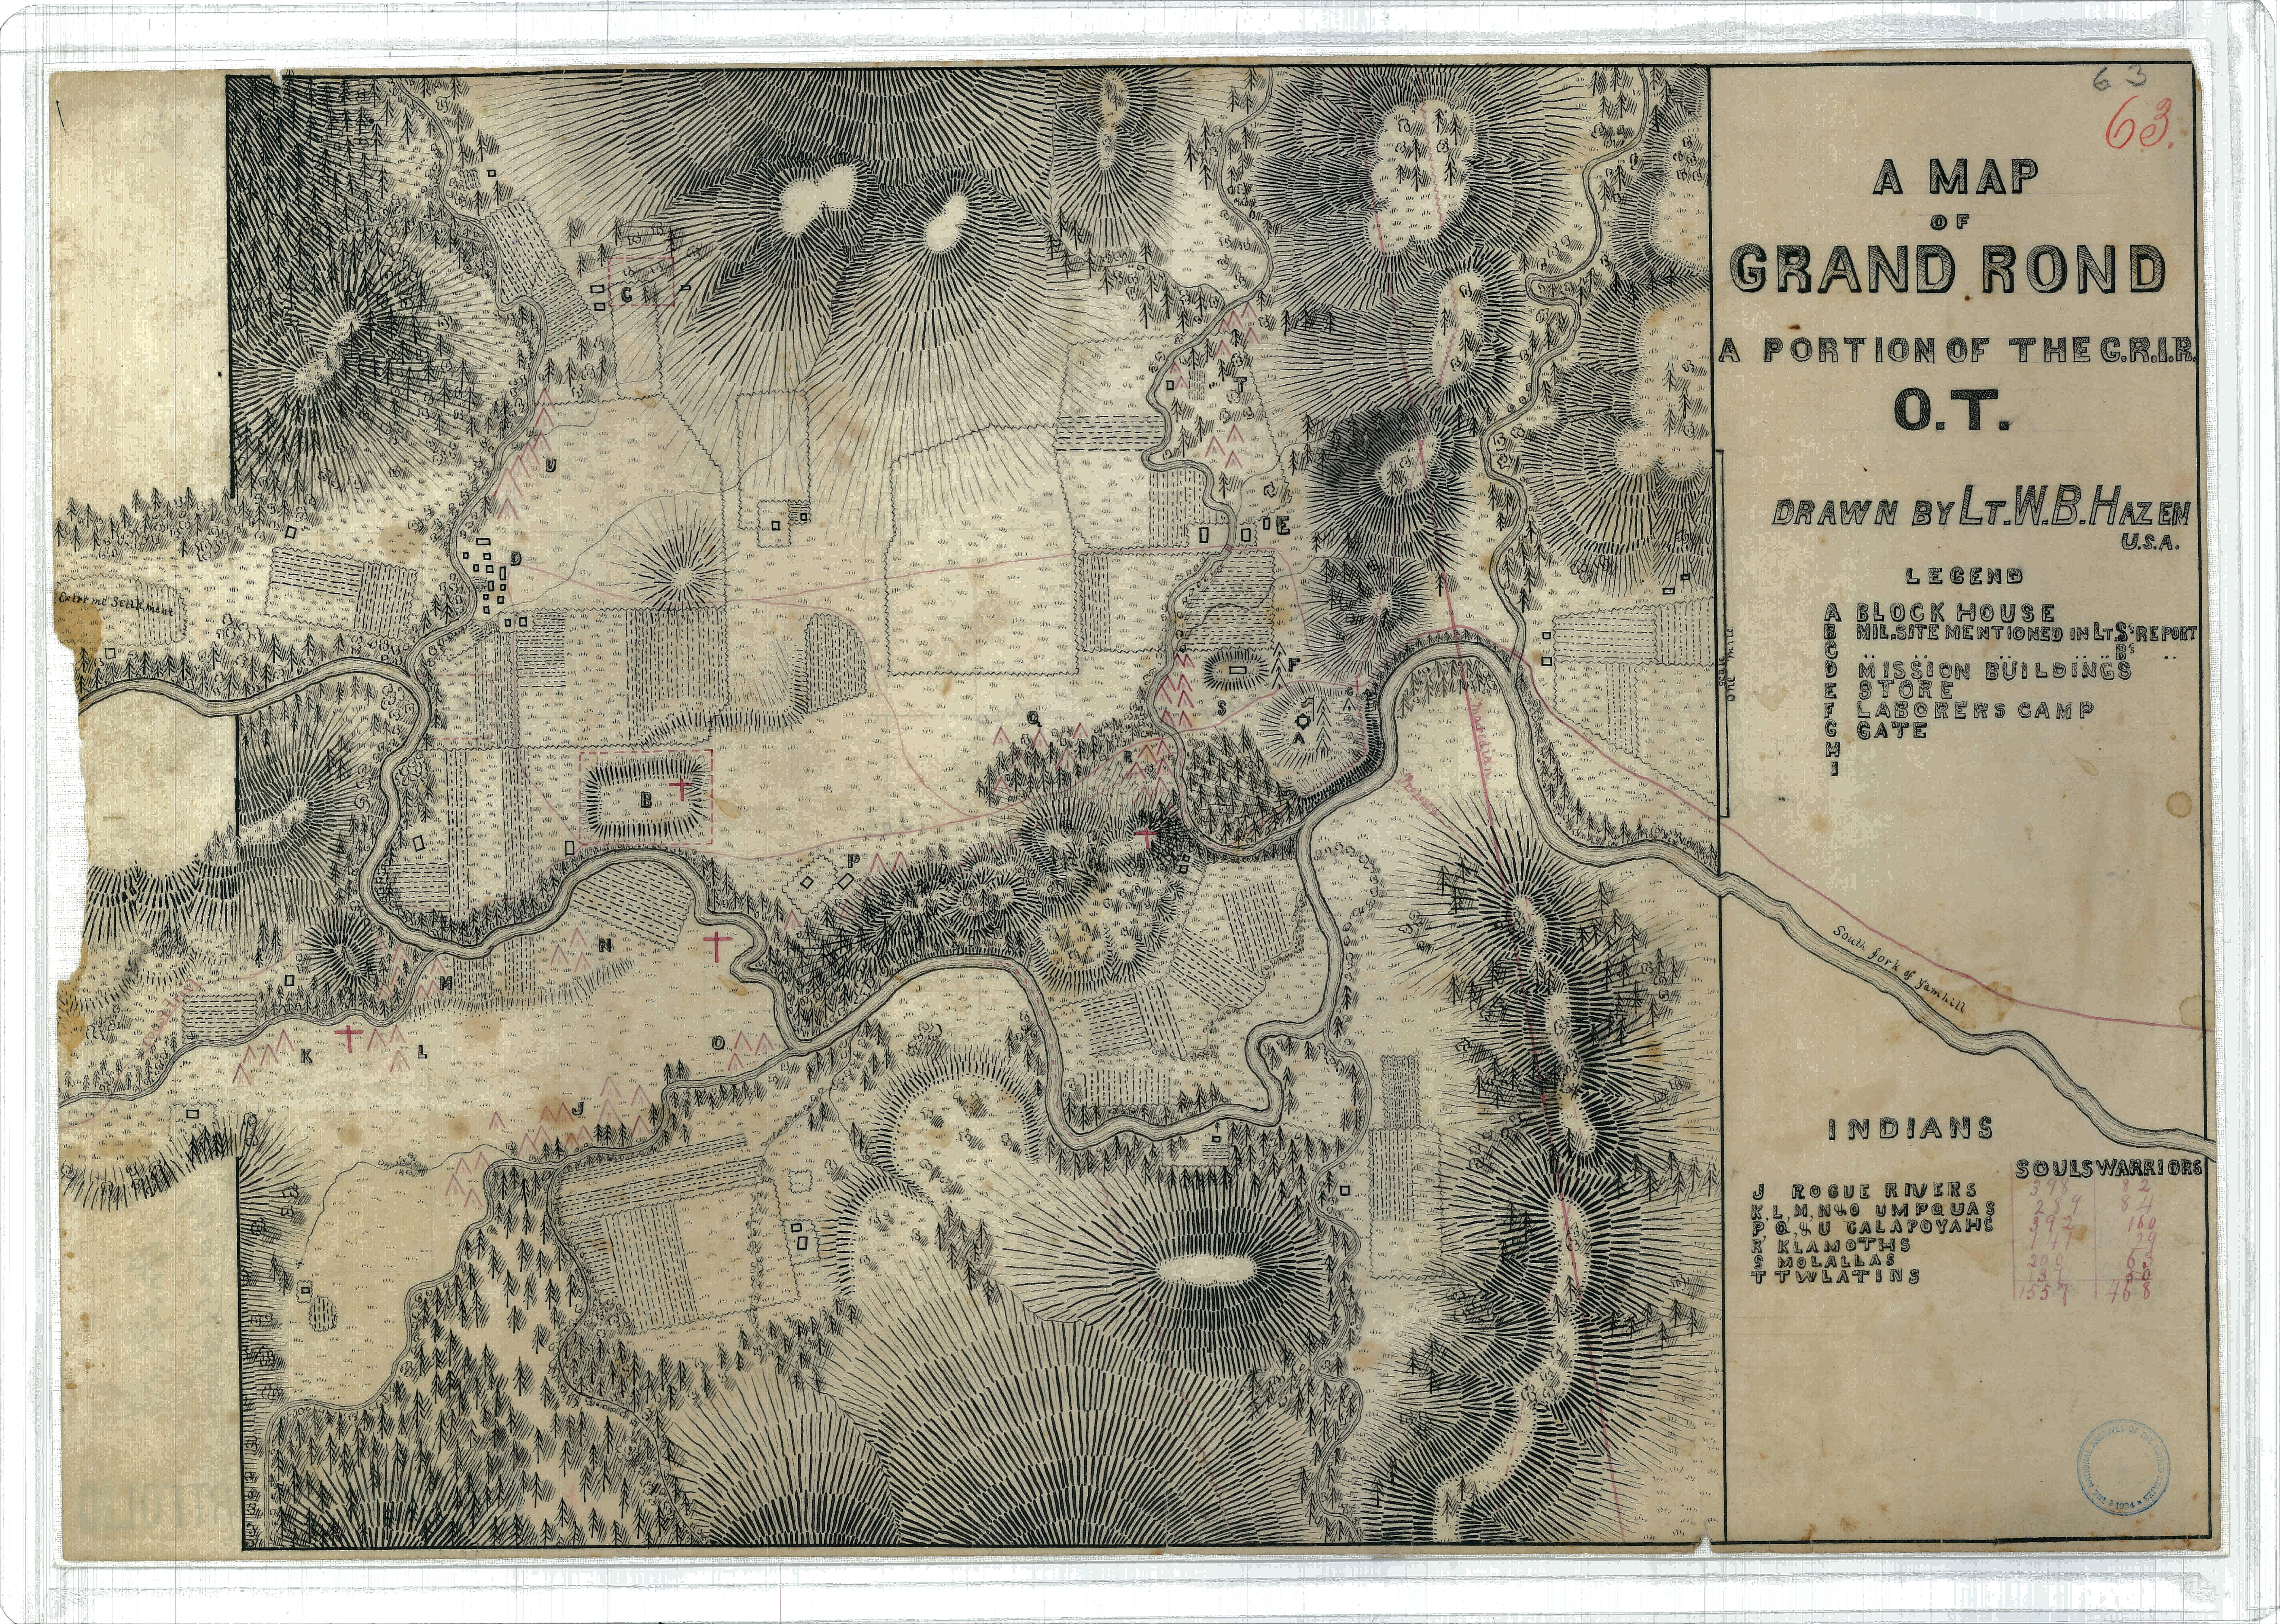 Original plan for the Grand ROnde Reservation